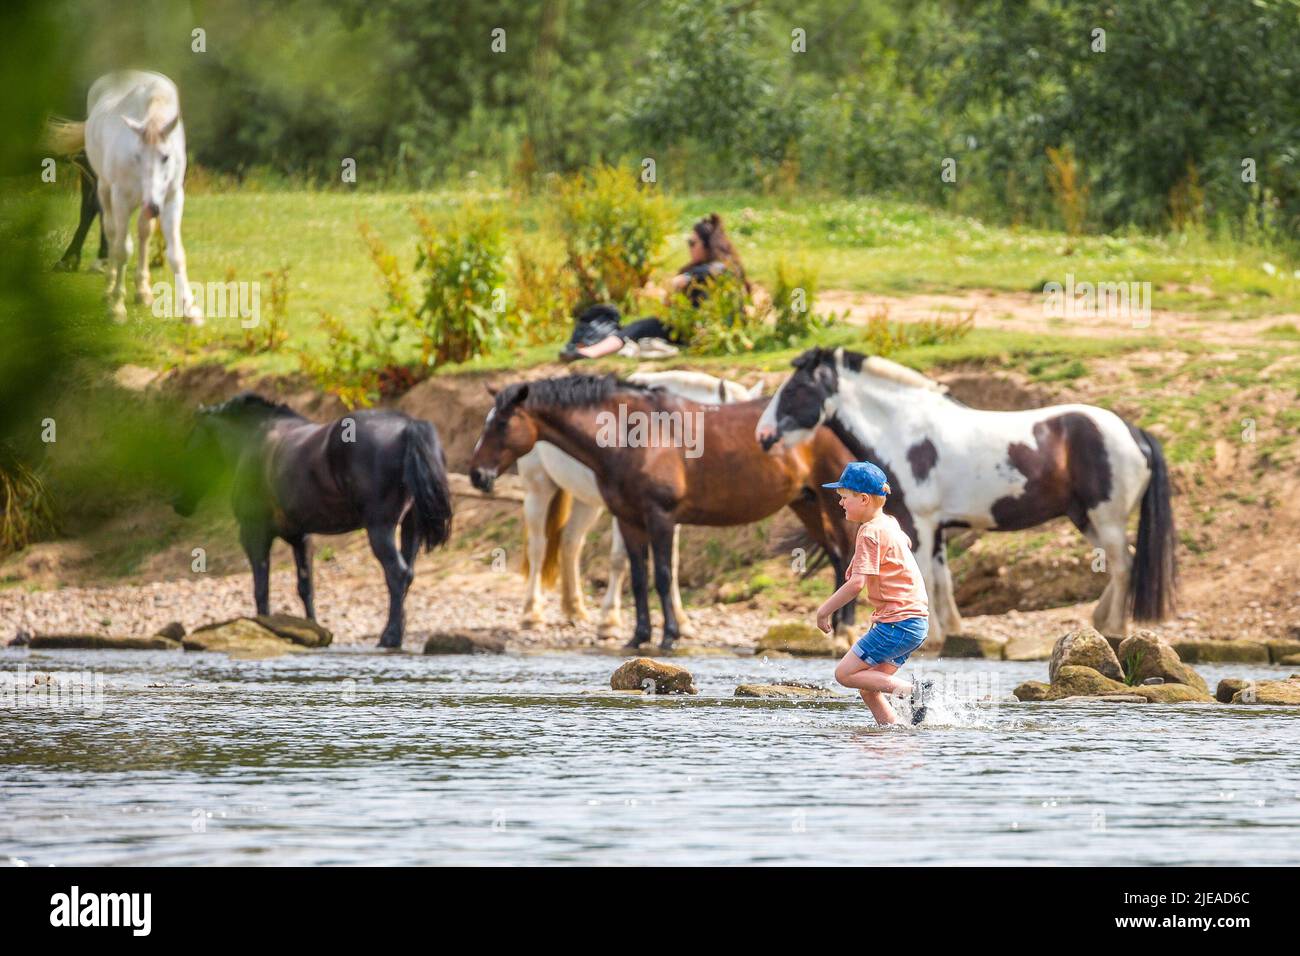 Kidderminster, UK. 26th June, 2022. UK weather: sunny weather and warm temperatures give the locals a good excuse to cool off in a shallow river. A young boy splashes through the shallow river in front of a group of horses who are also enjoying the cool water. Credit: Lee Hudson/Alamy Live News Stock Photo